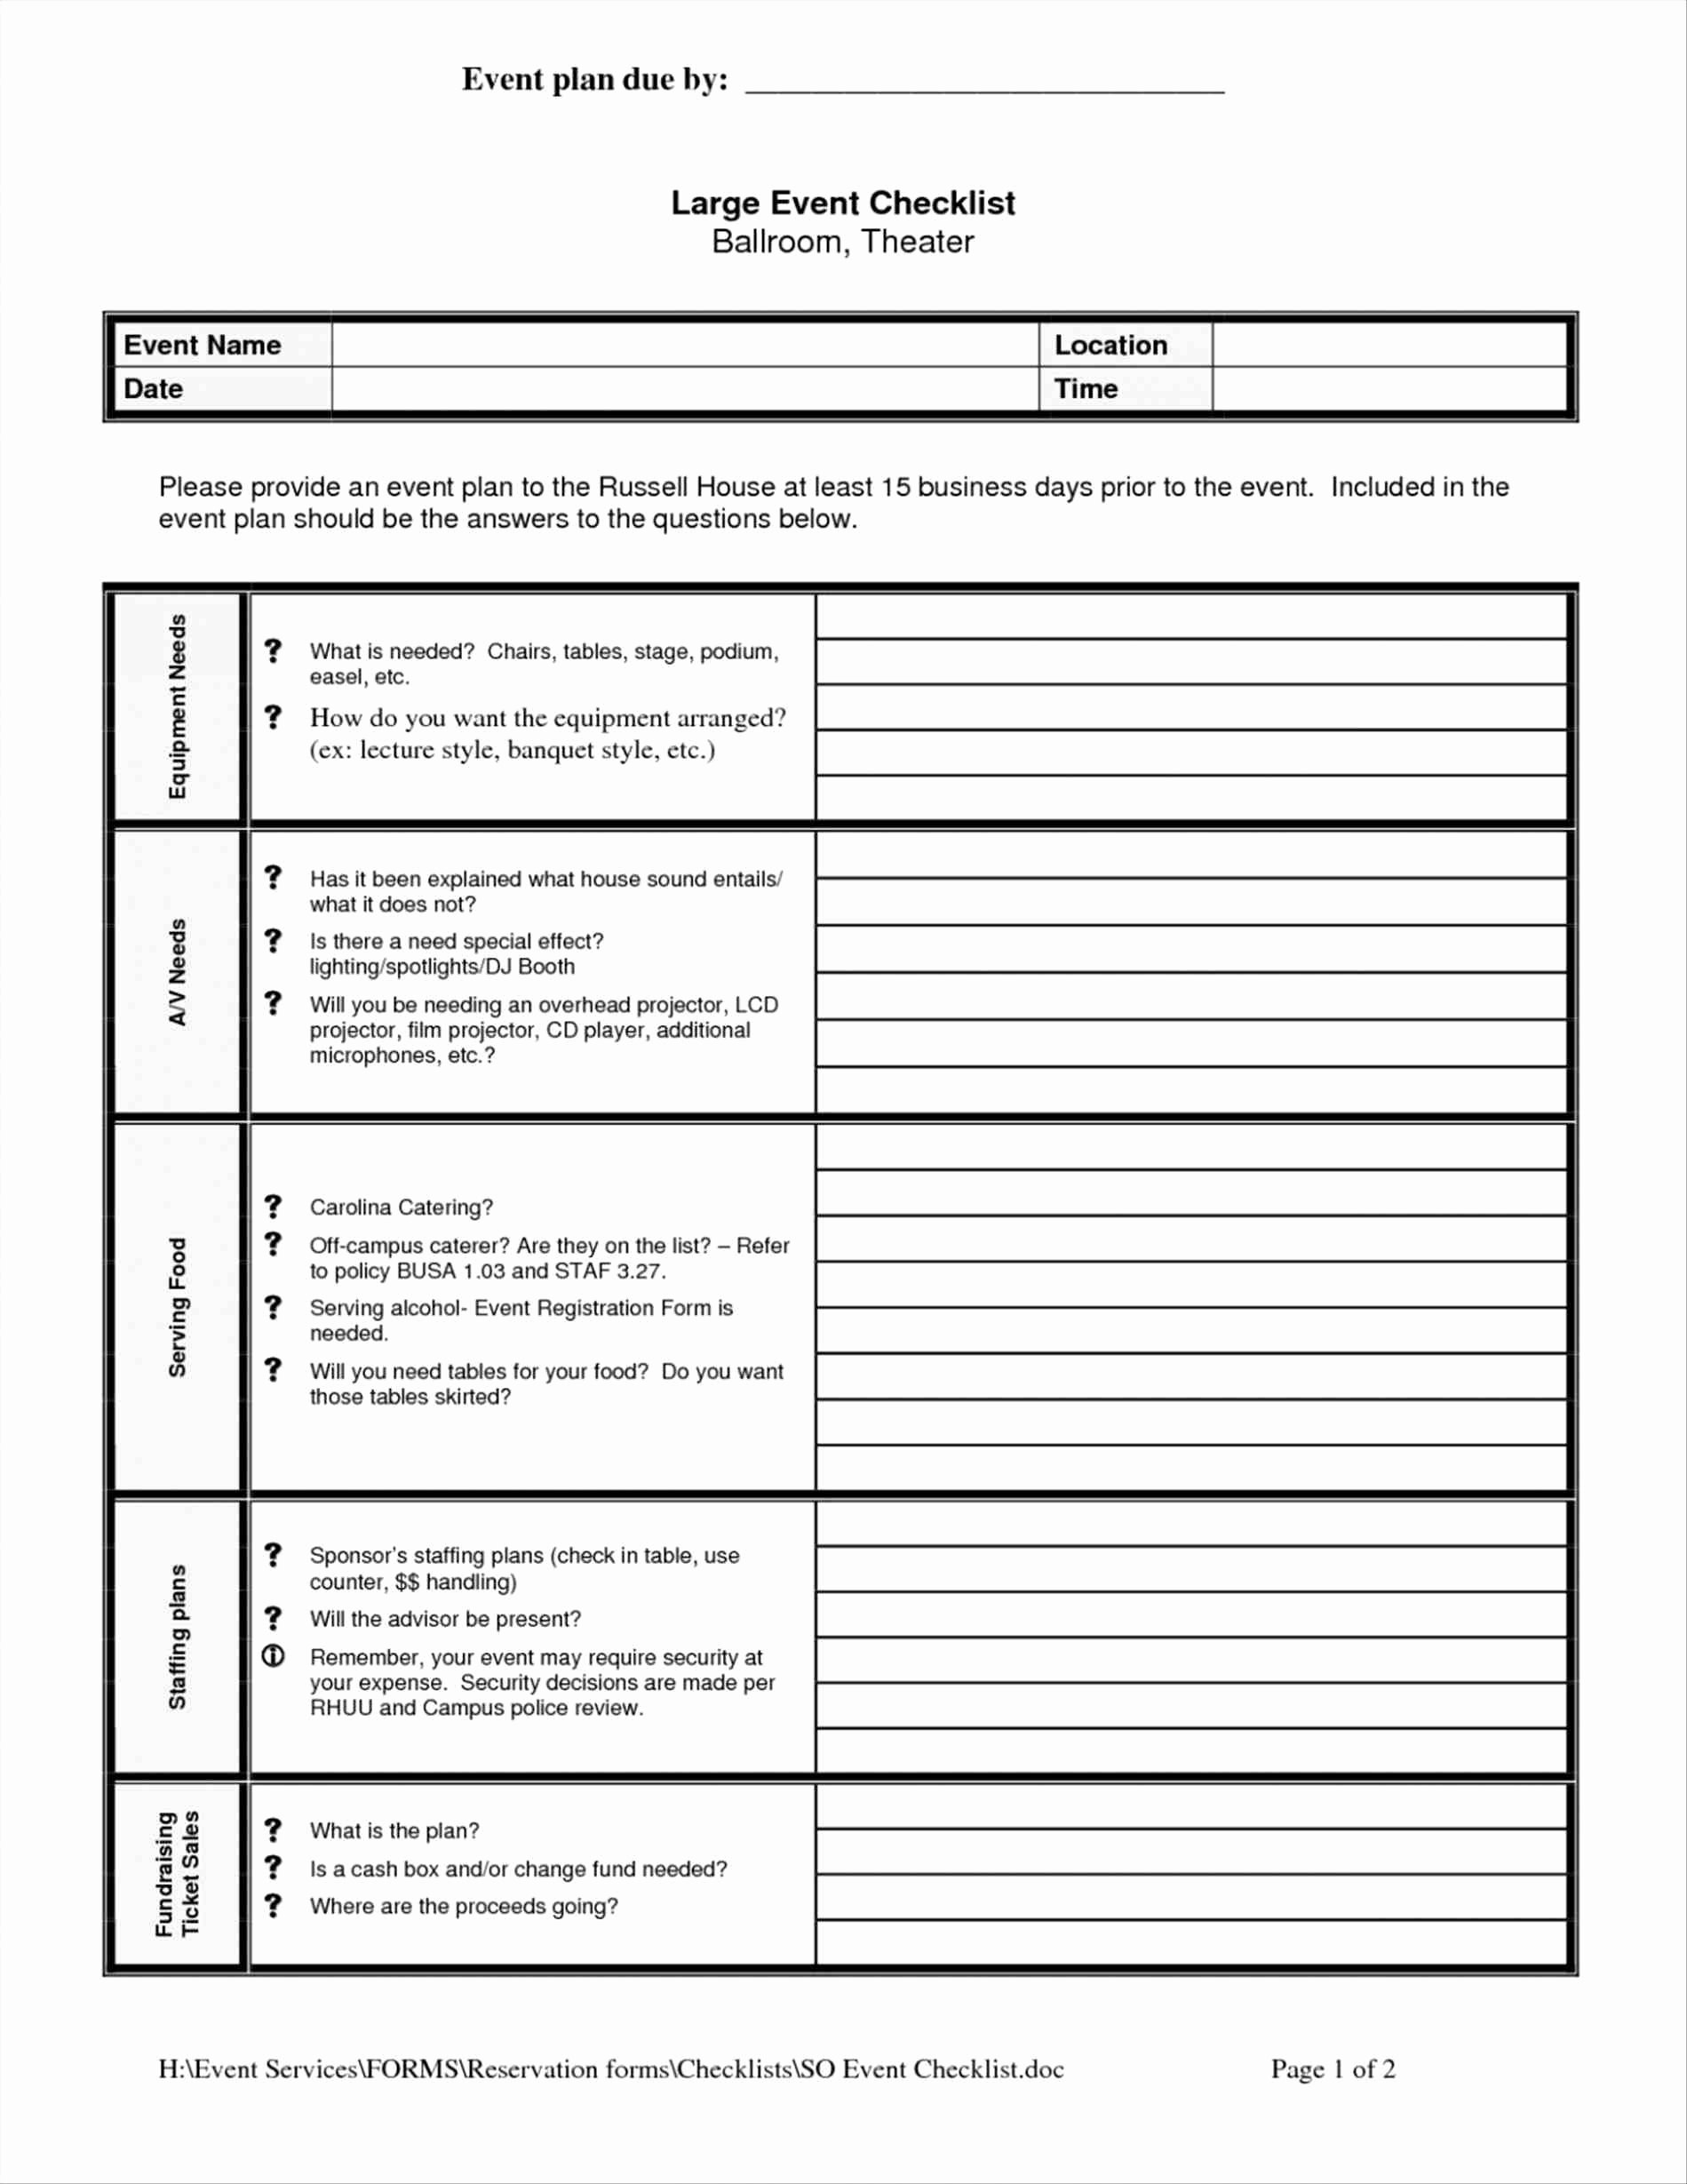 Event Debrief Report Template 10  Examples of Professional Templates